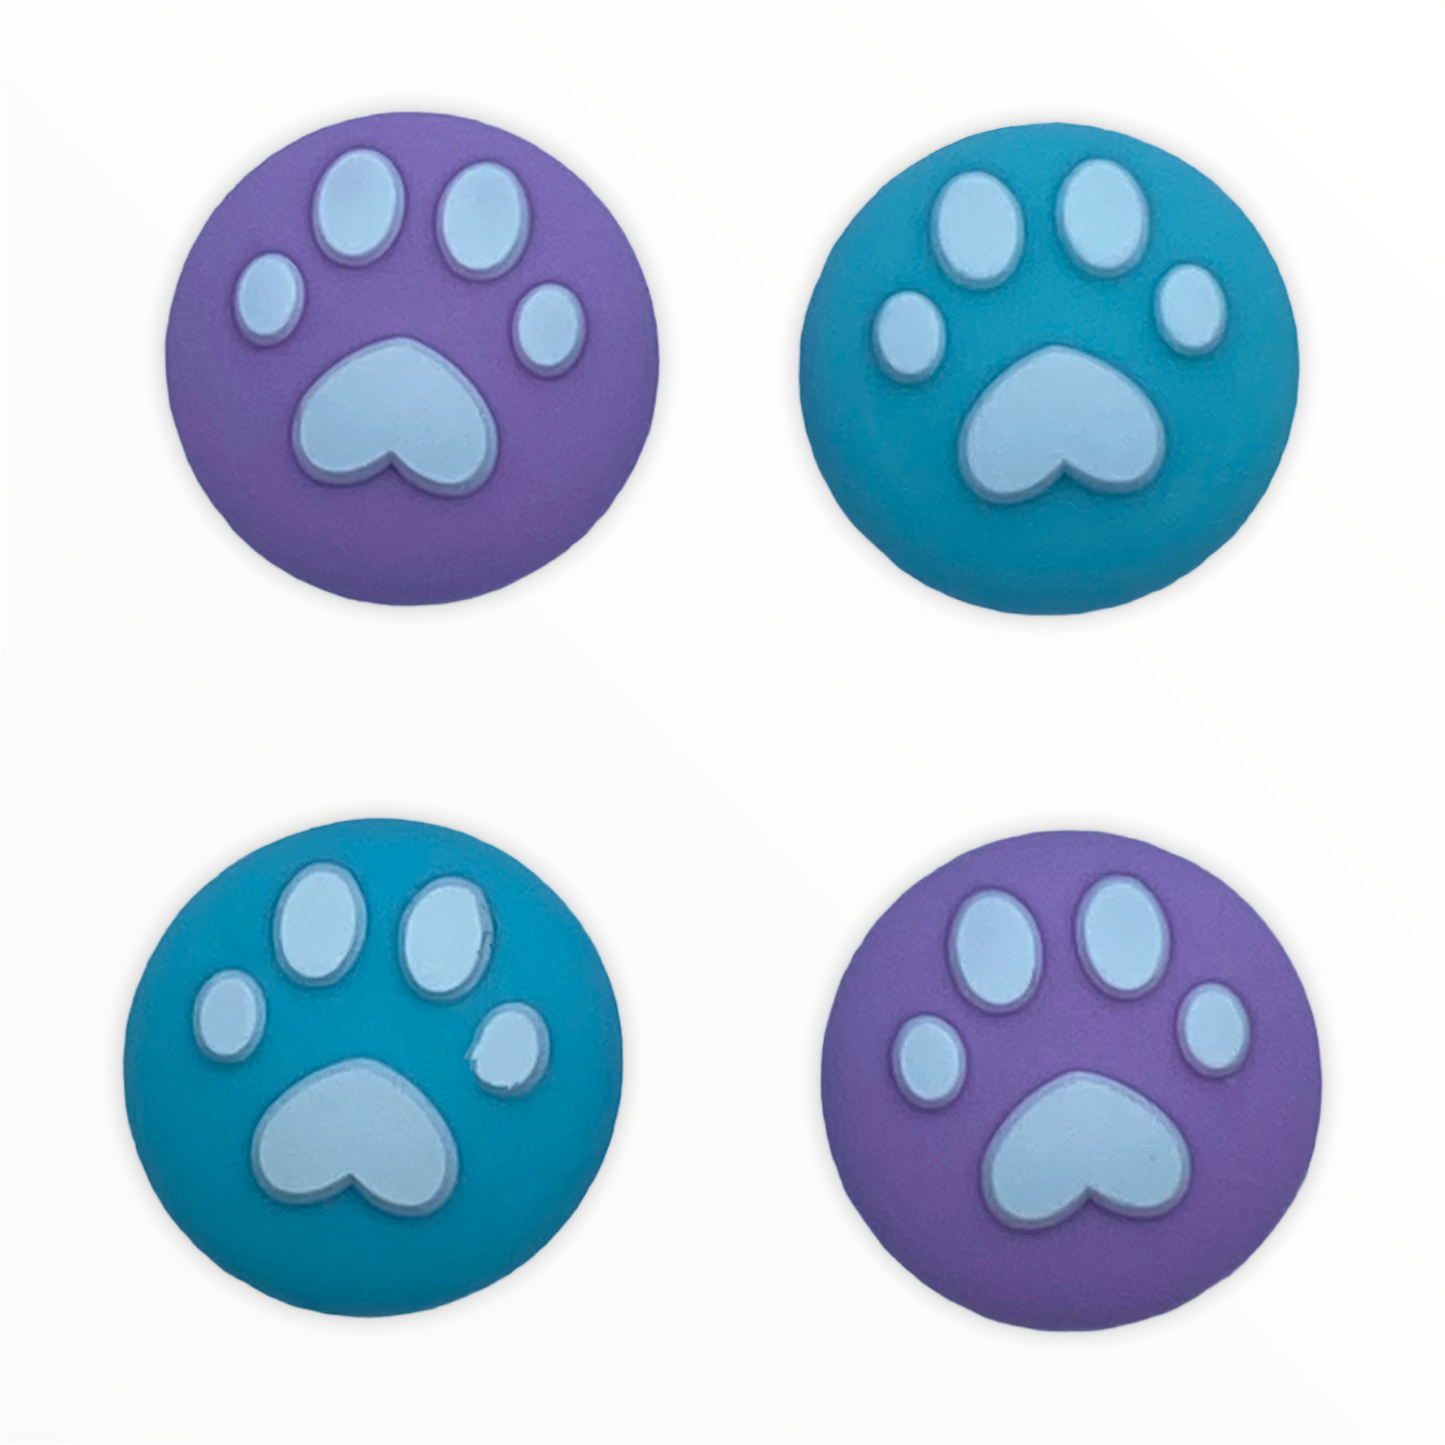 JenDore Purple & Blue 4Pcs Paws Silicone Thumb Grip Caps for Nintendo Switch